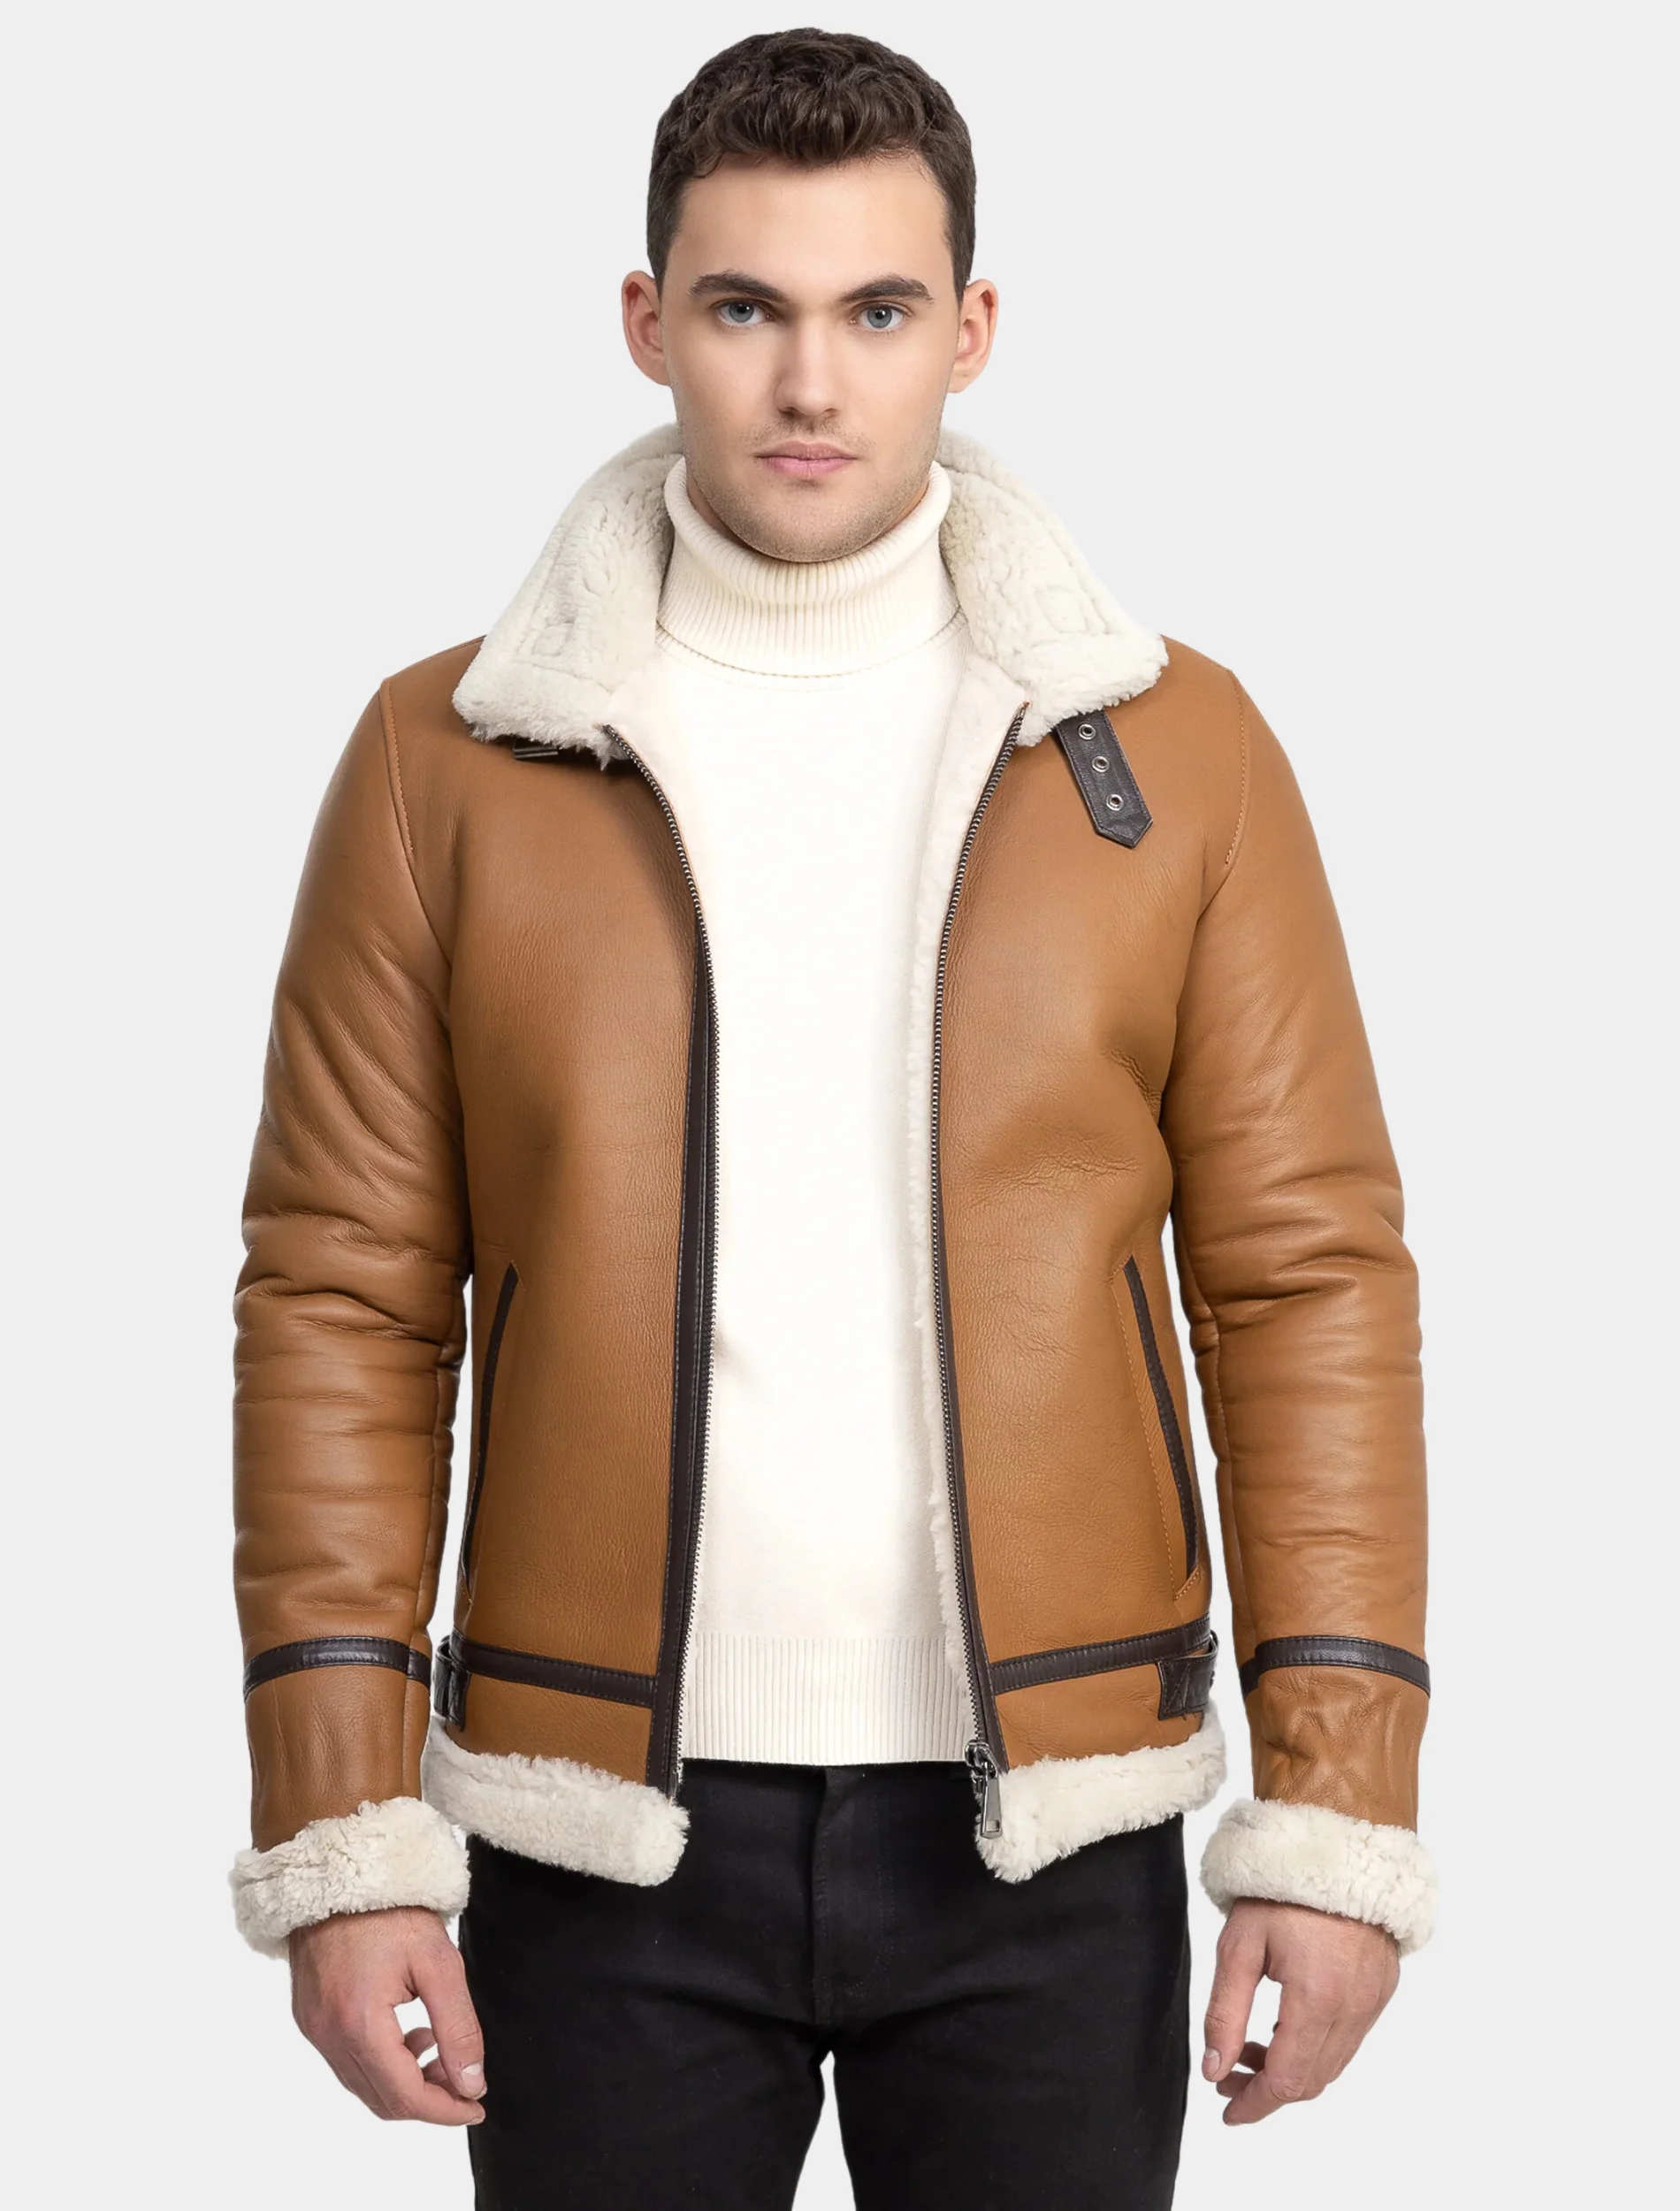 Shop Mens Classy Tan Brown Leather White Shearling Aviator Jacket